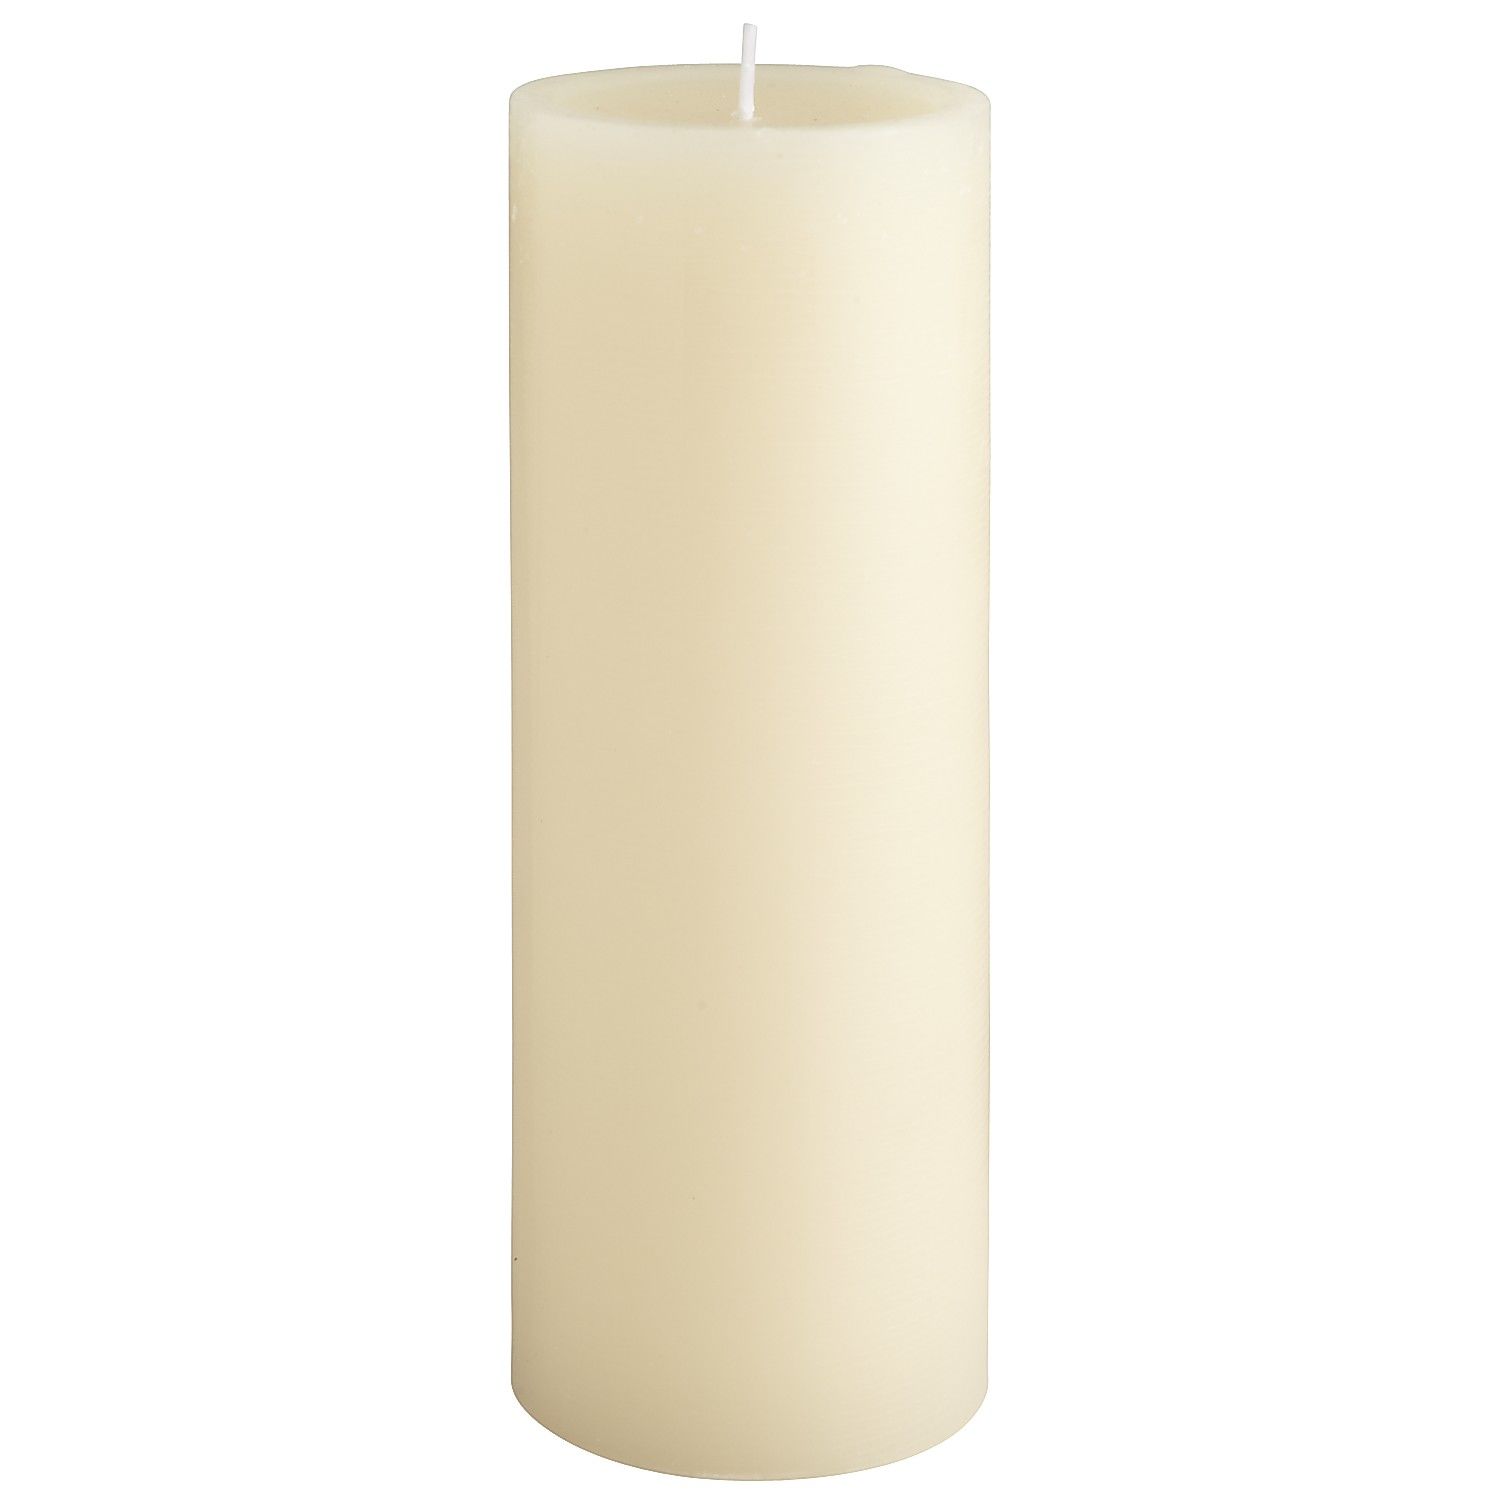 Unscented Ivory 3x8 Pillar Candle | Pier 1 Imports